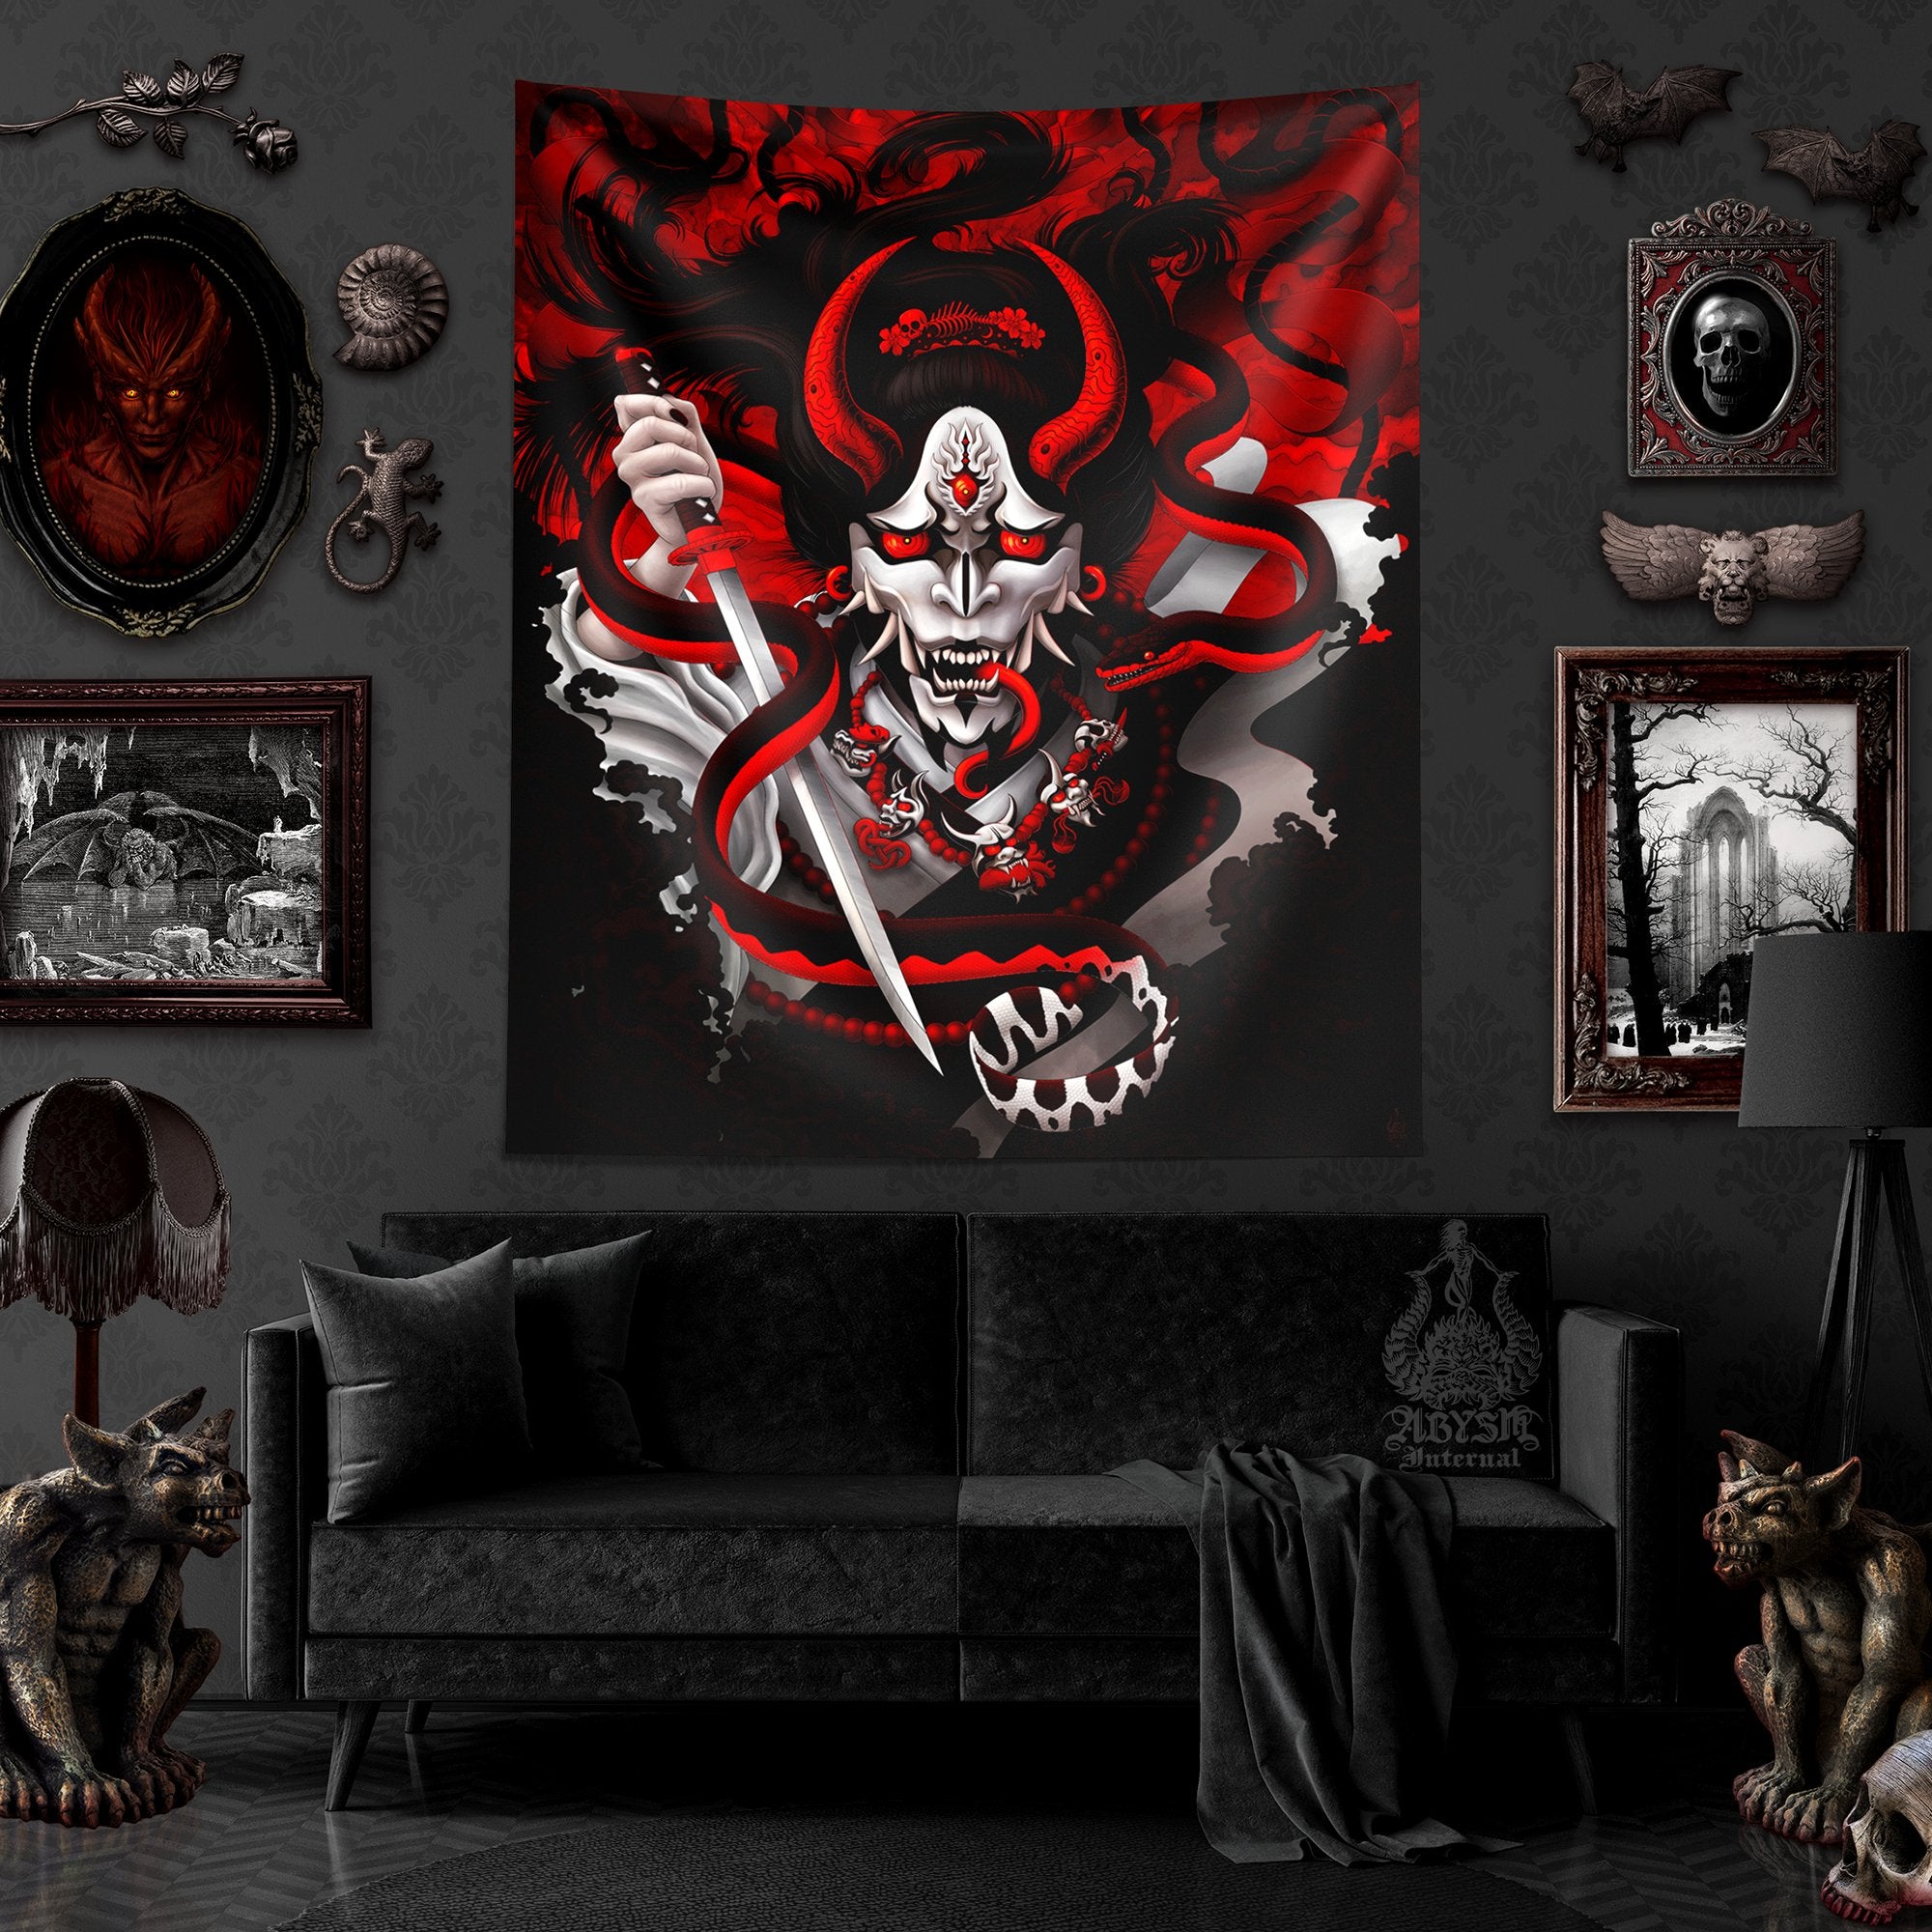 Japanese Demon Tapestry, Bloody White Goth Hannya and Snake Wall Hanging, Manga, Anime and Gamer Room Decor, Vertical Art Print - Red - Abysm Internal